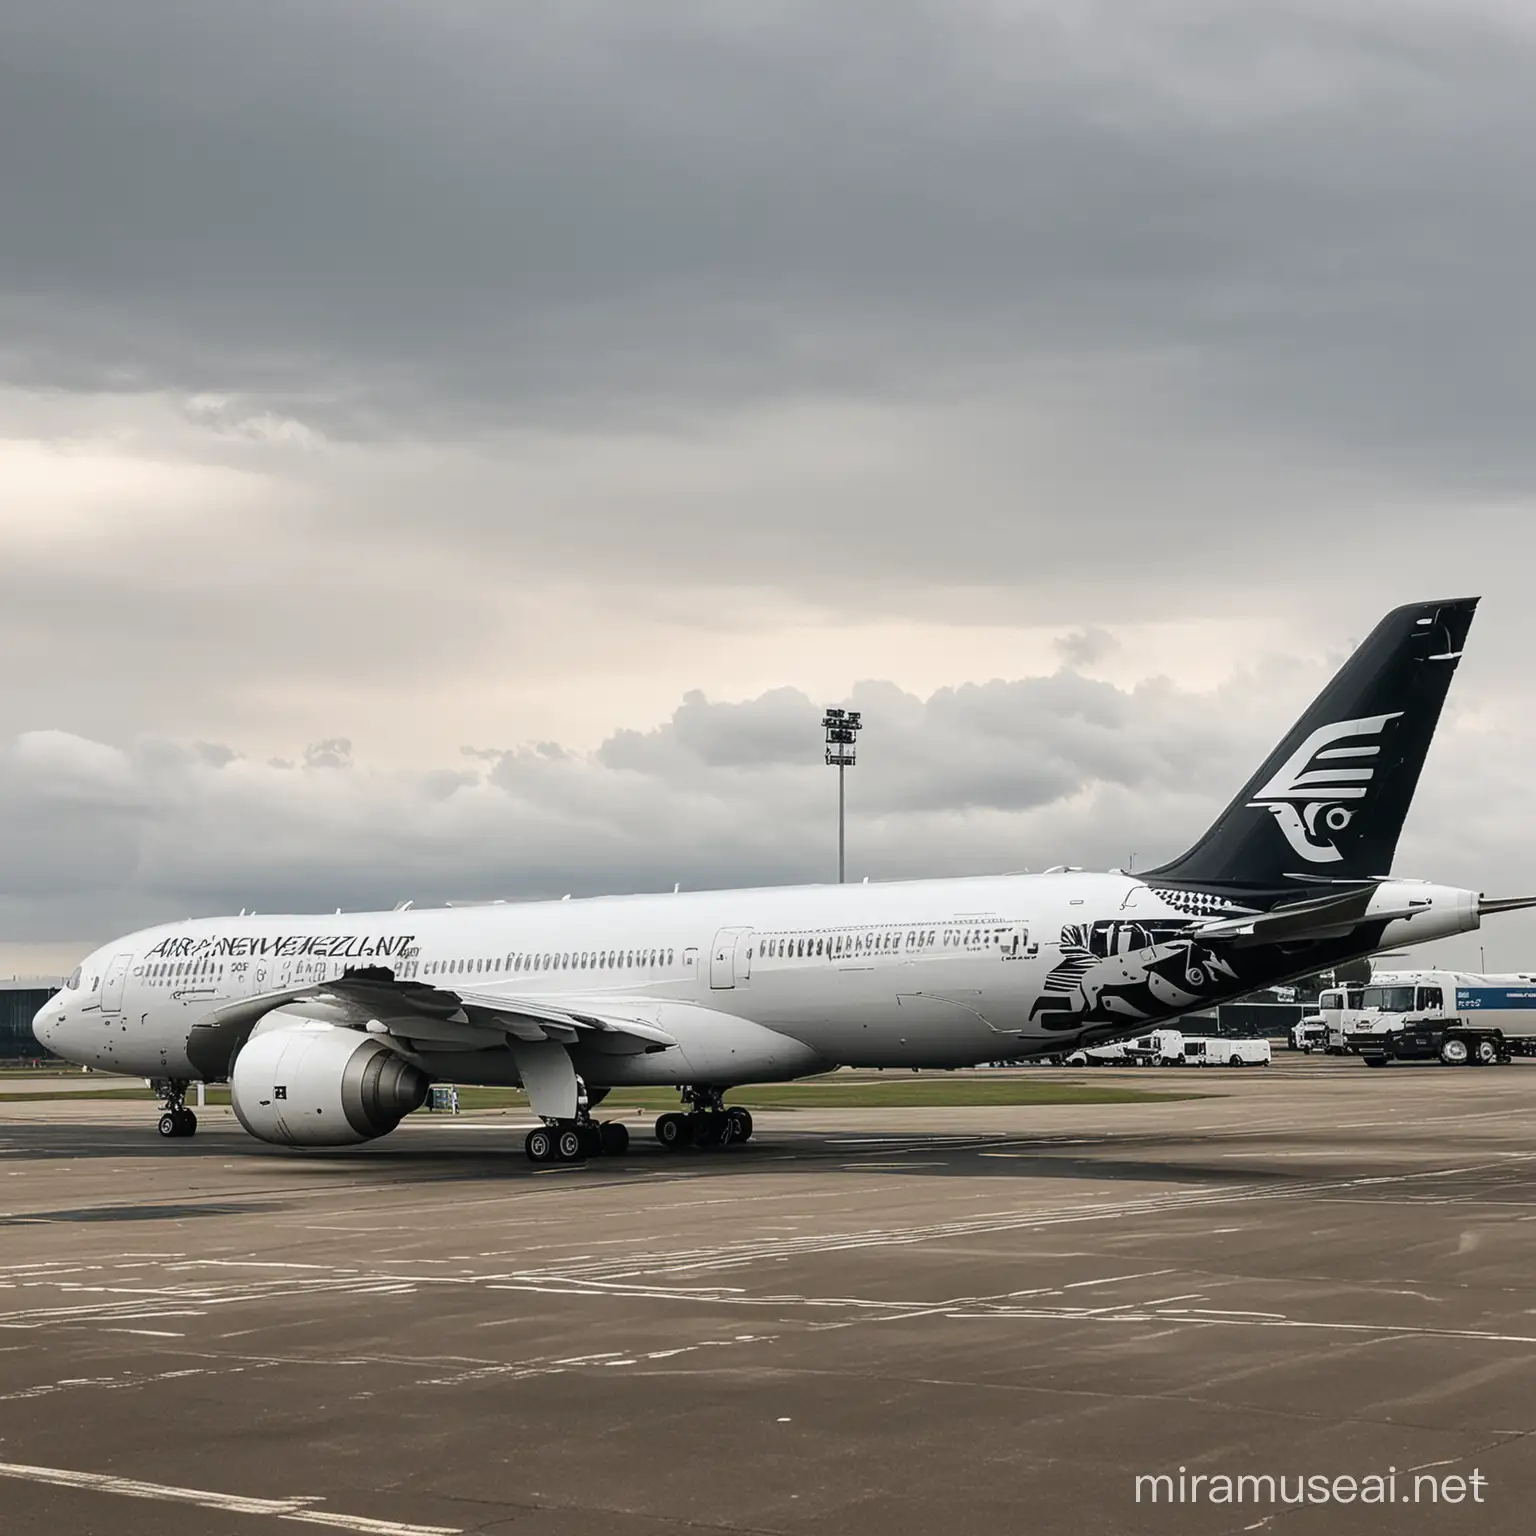 Air New Zealand plane parked at the vaclav havel airport in prague, czechia